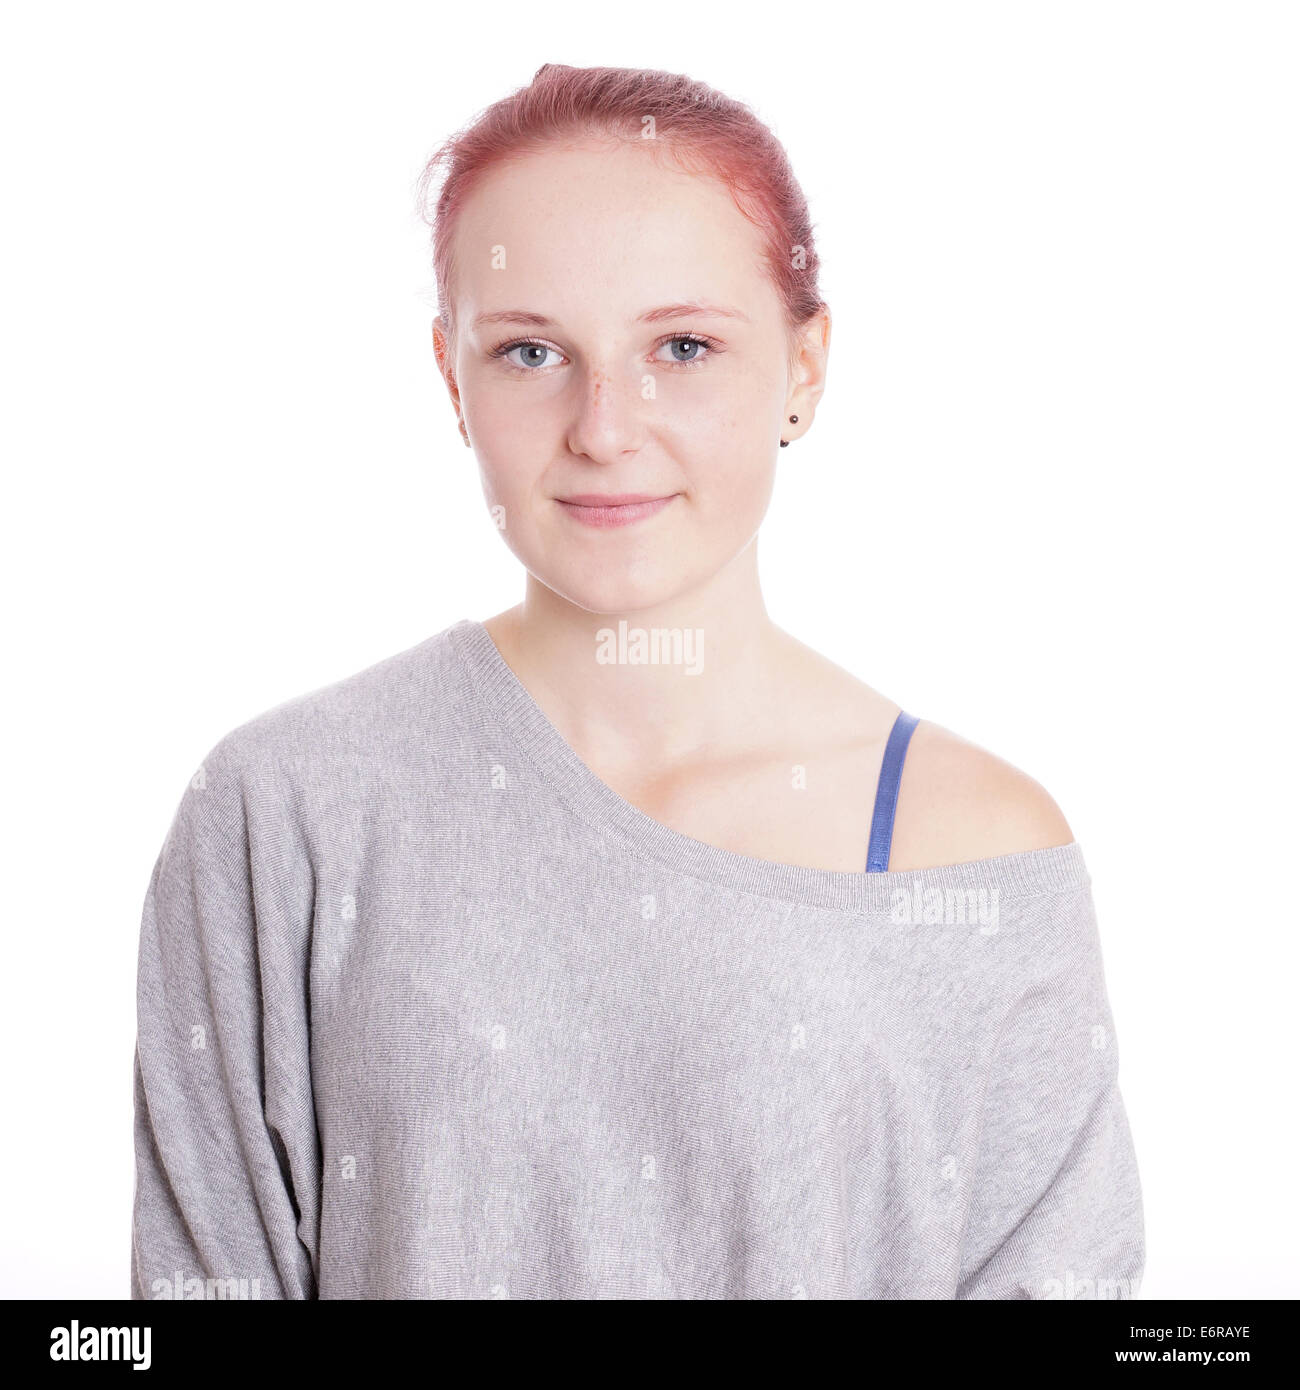 young woman with a neutral but friendly expression Stock Photo